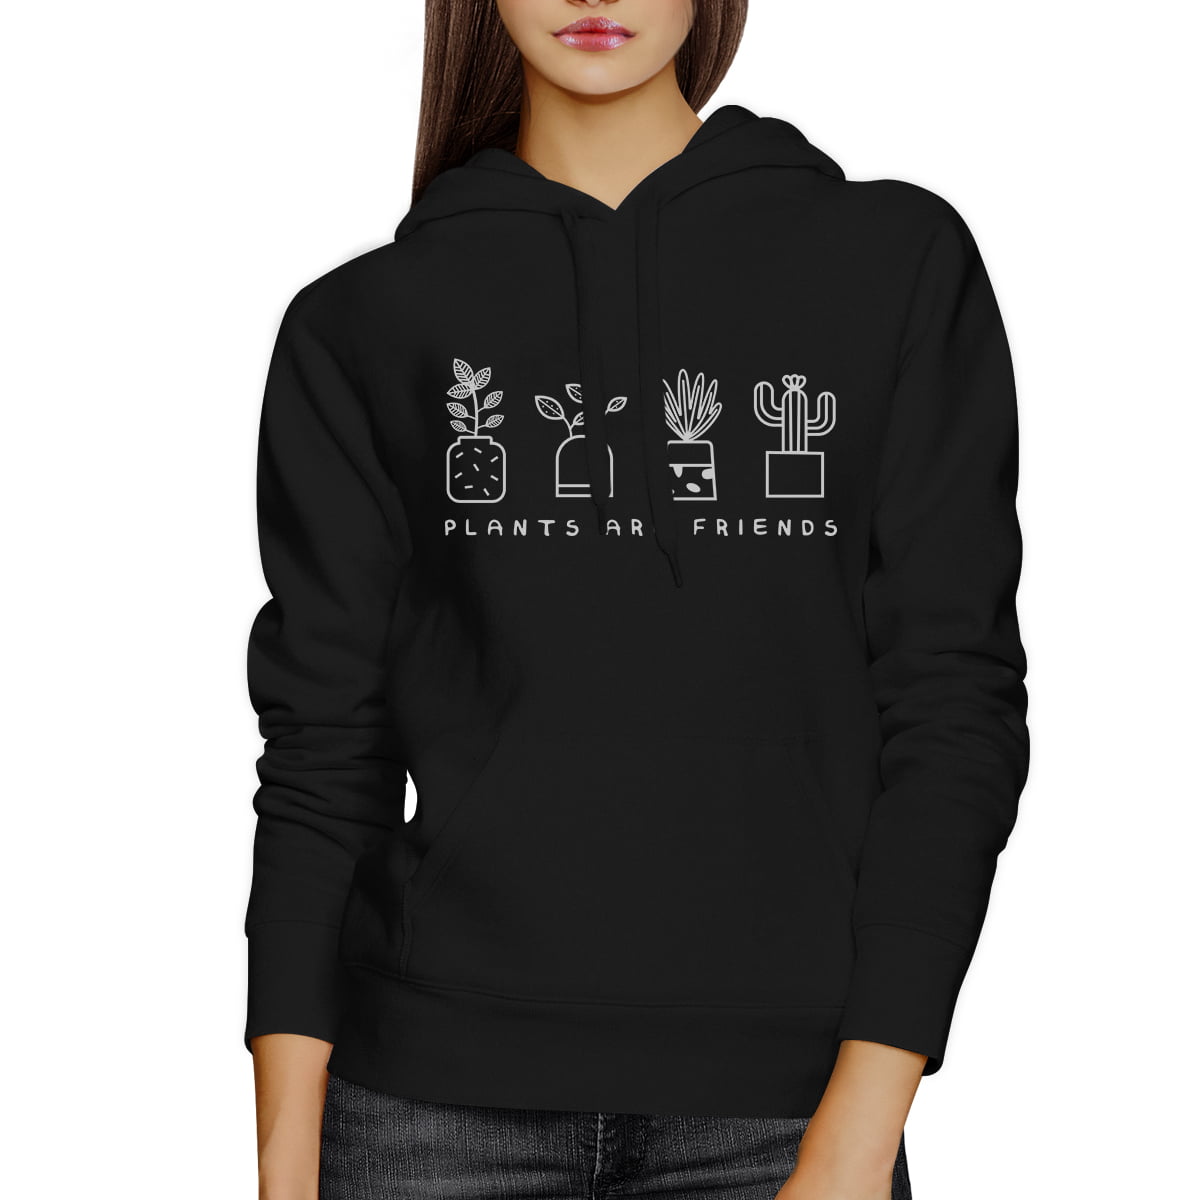 Plants are Friends Adorable Design Graphic Hoodie for Plant Lovers 